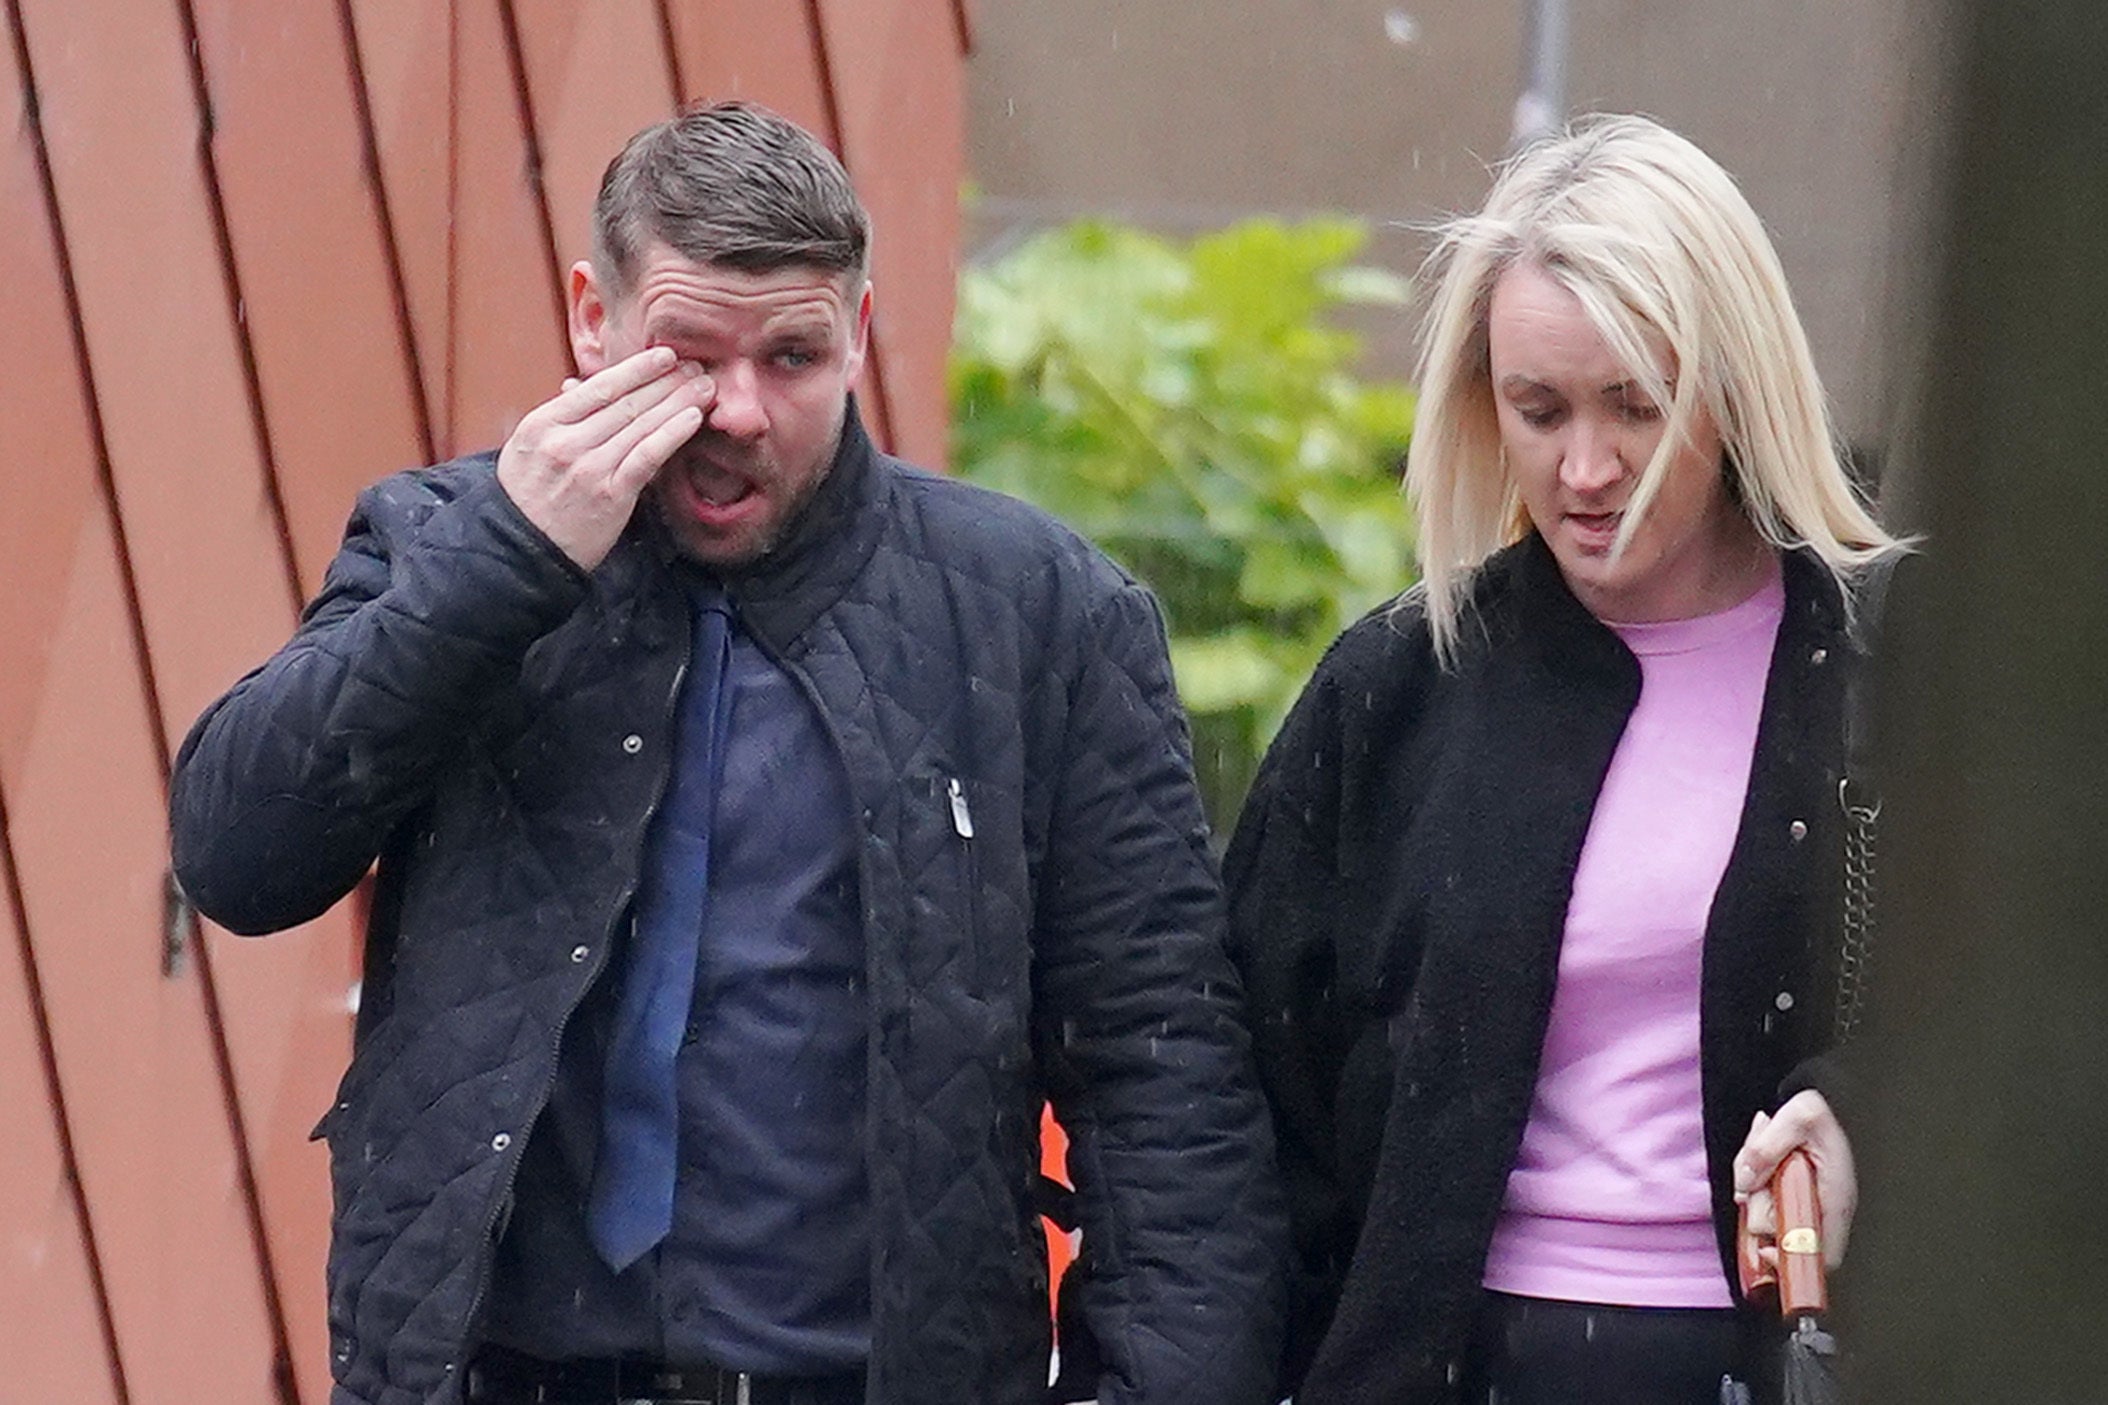 Peter Spooner, father of Brianna Ghey, arriving with his partner (name not given) at Manchester Crown Court on Monday